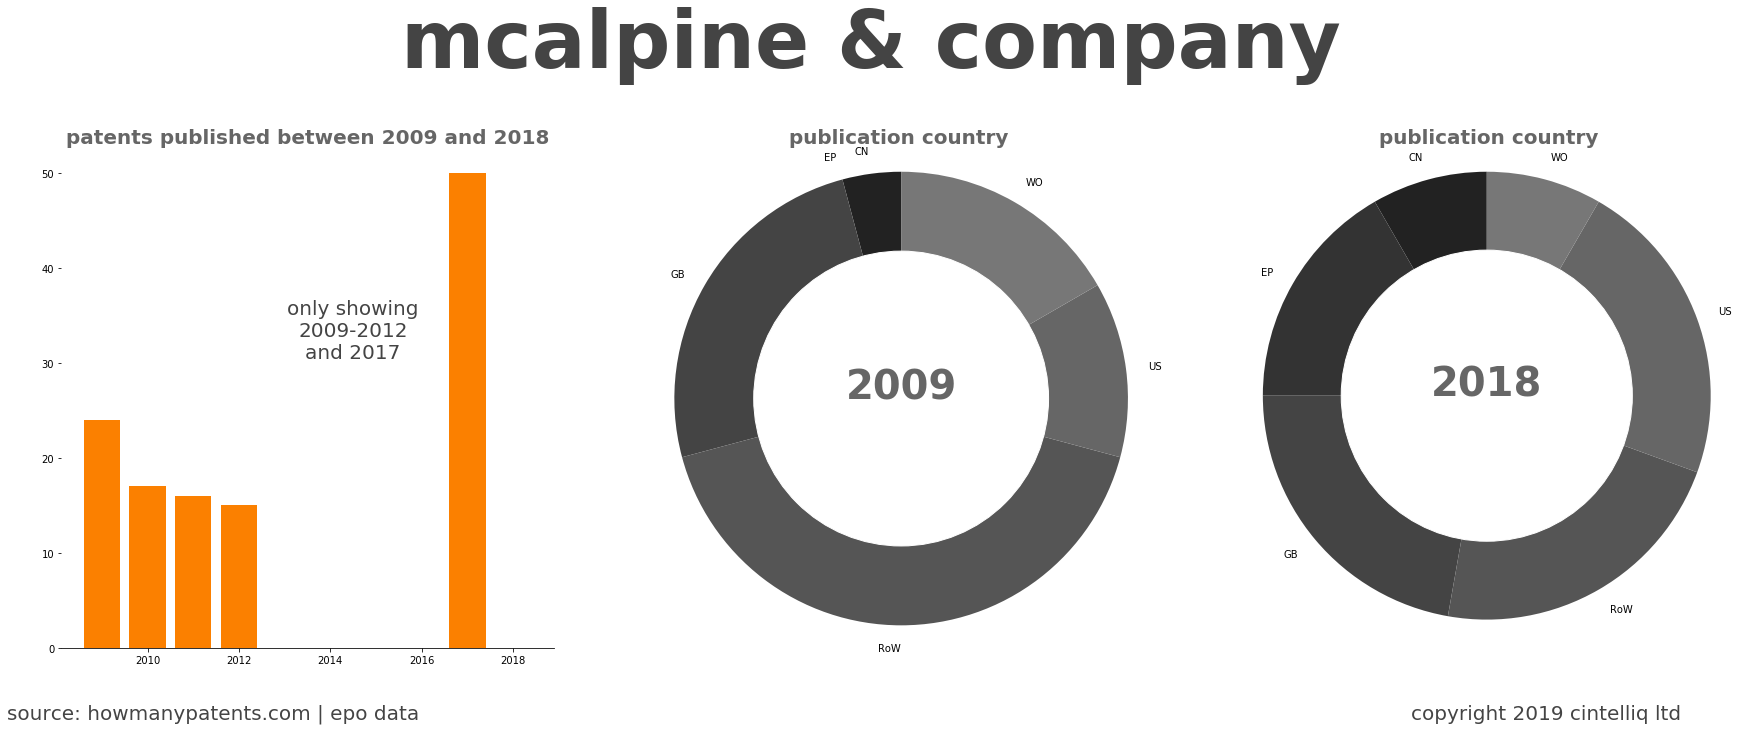 summary of patents for Mcalpine & Company